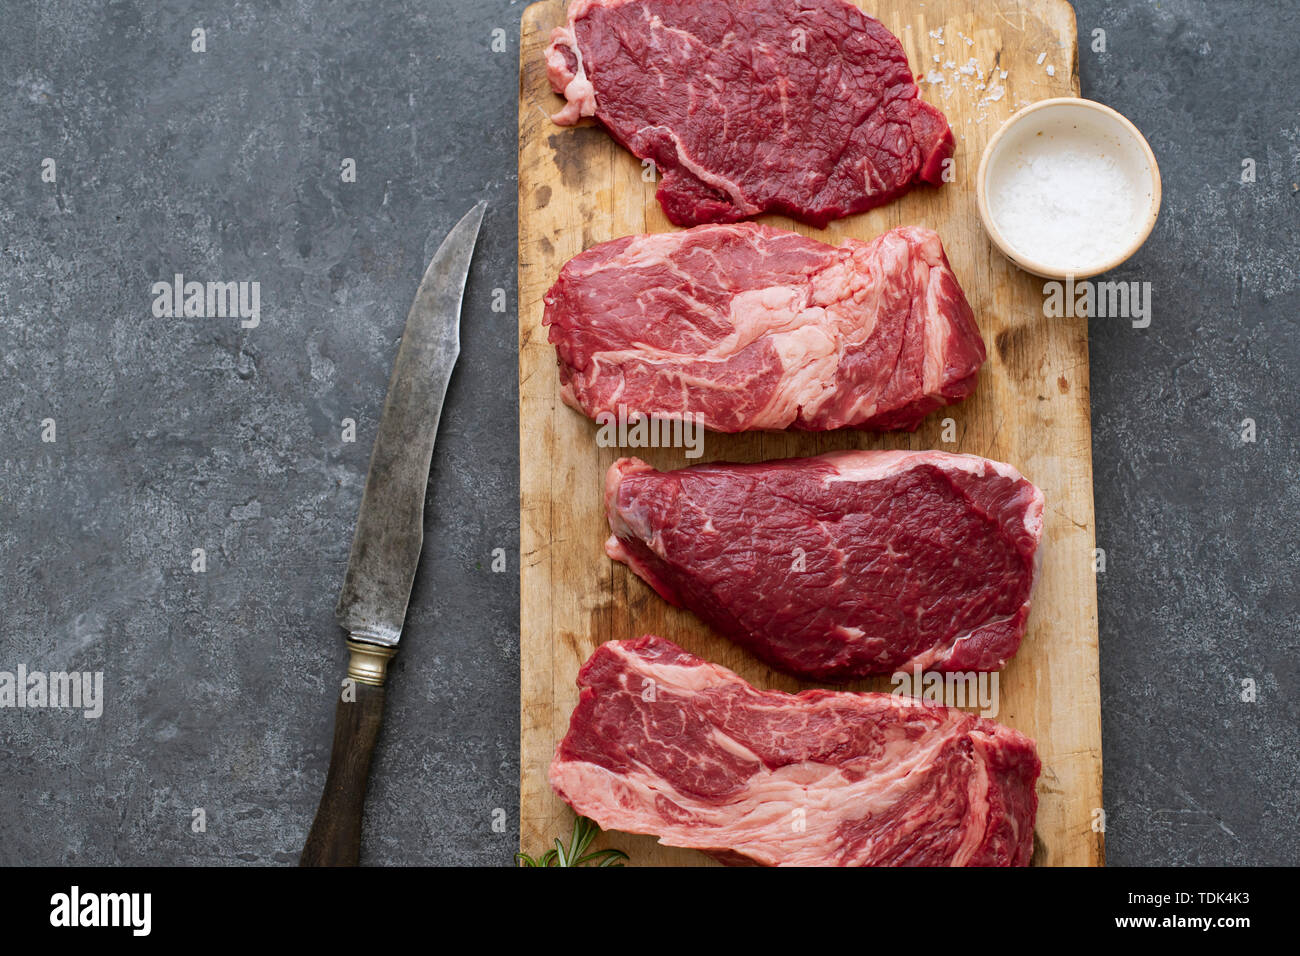 Raw black angus prime beef steak variety on vintage cutting board with rosemary, sea salt and spices Stock Photo